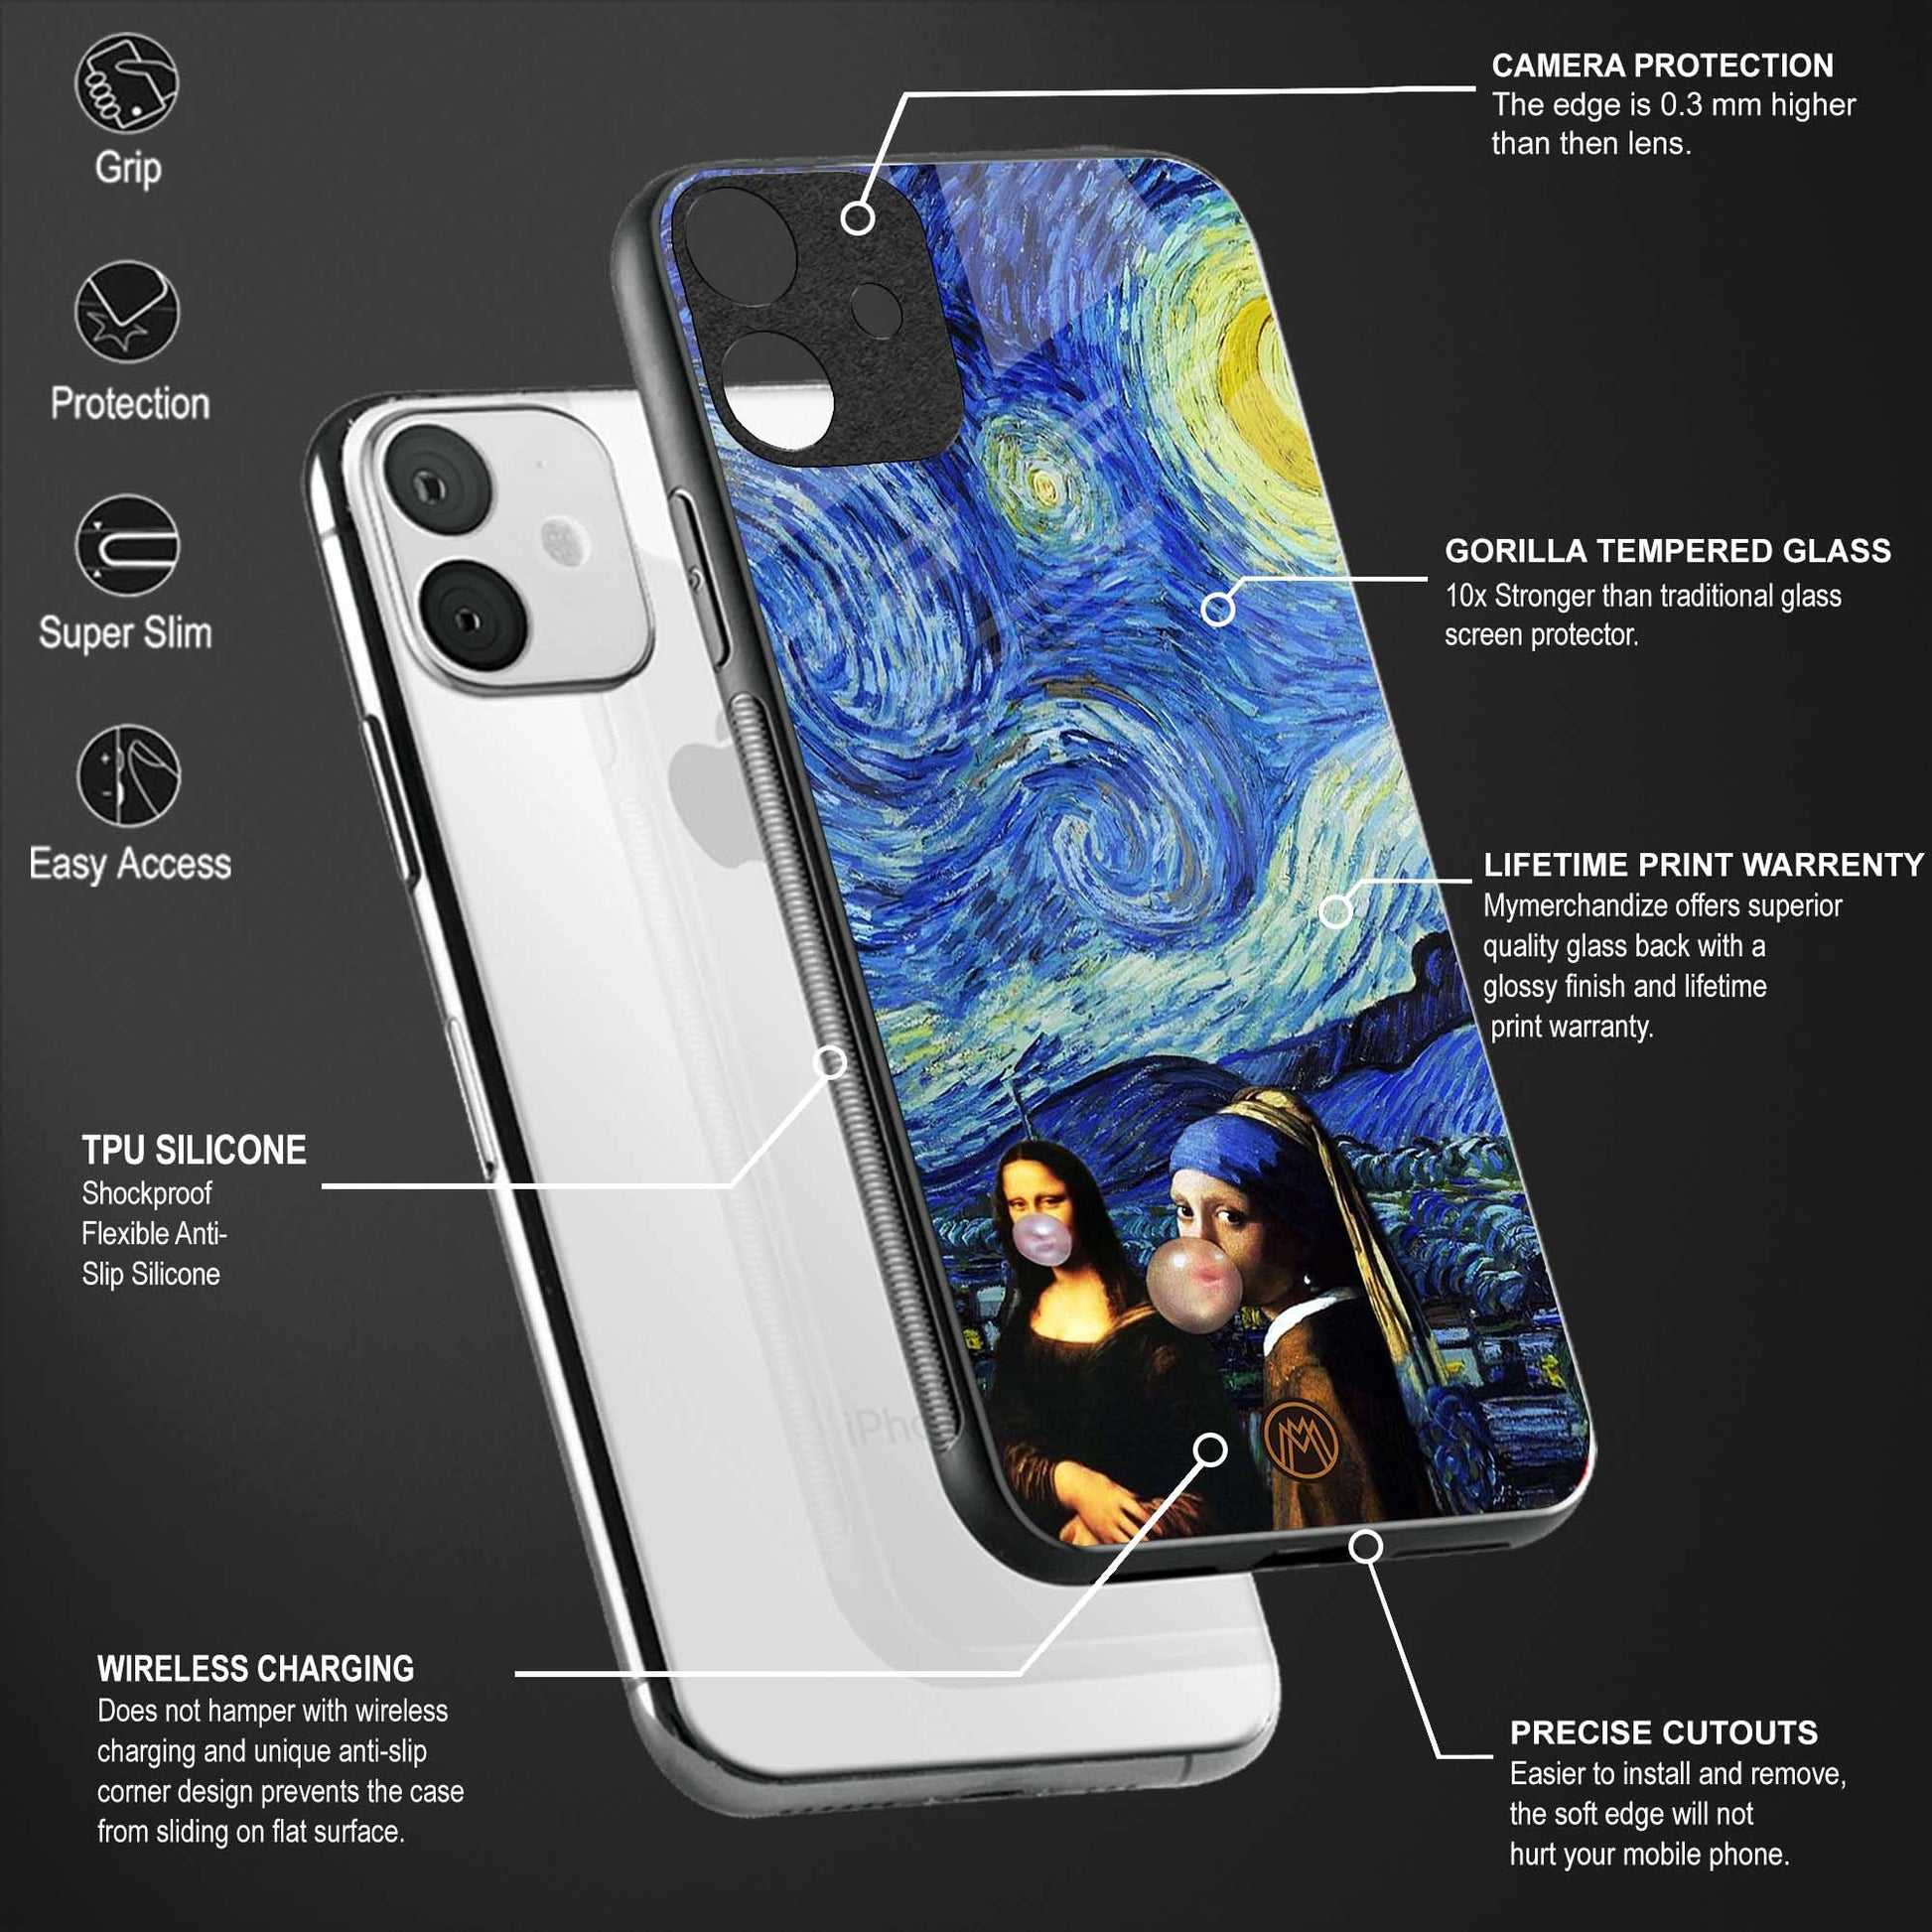 mona lisa starry night back phone cover | glass case for vivo y15c